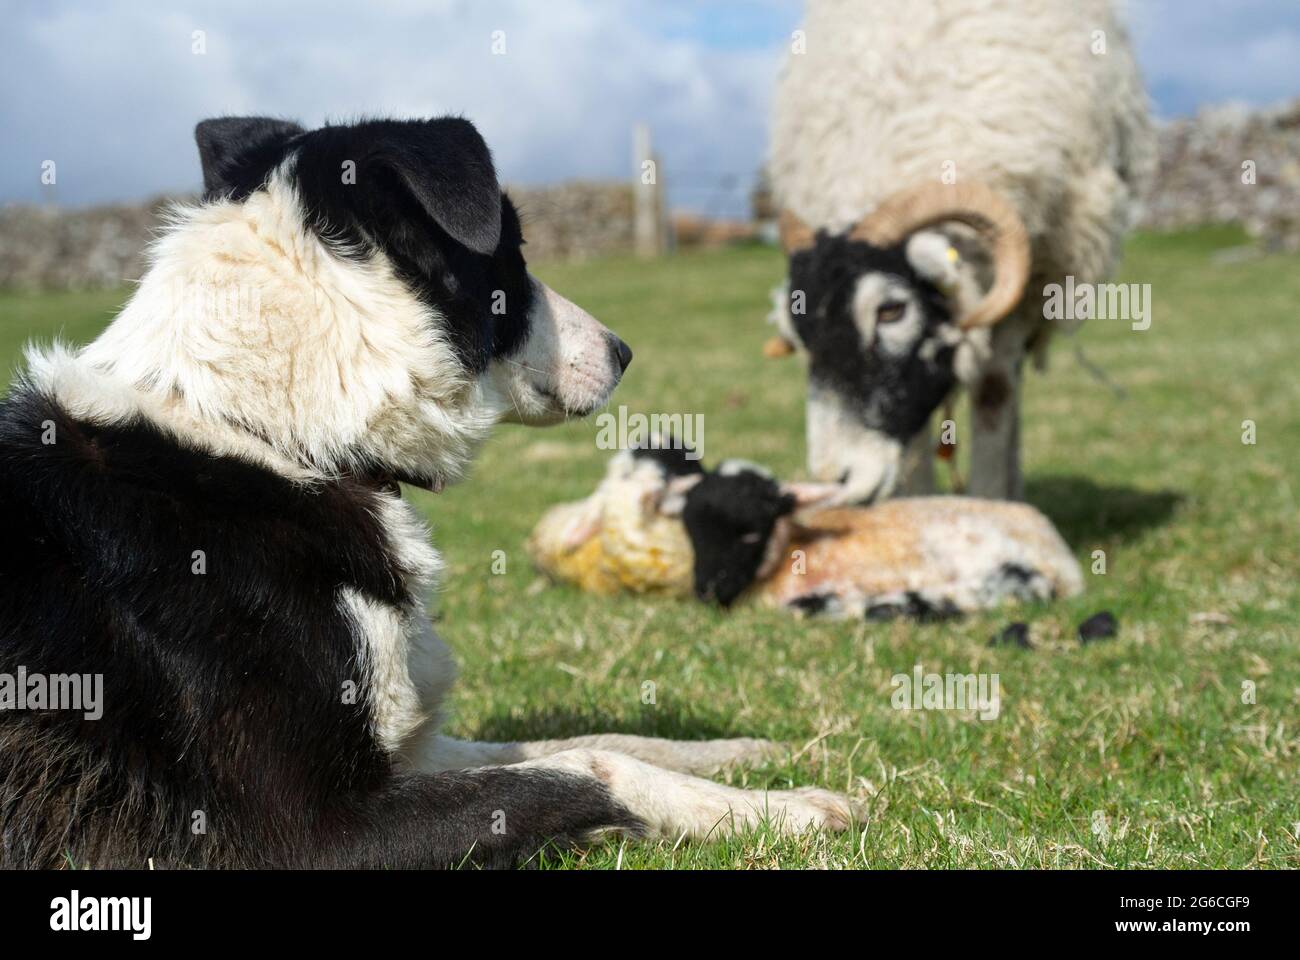 Border collie sheepdog watching a swaledale ewe with newborn lambs on a hill farm, Cumbria, UK. Stock Photo